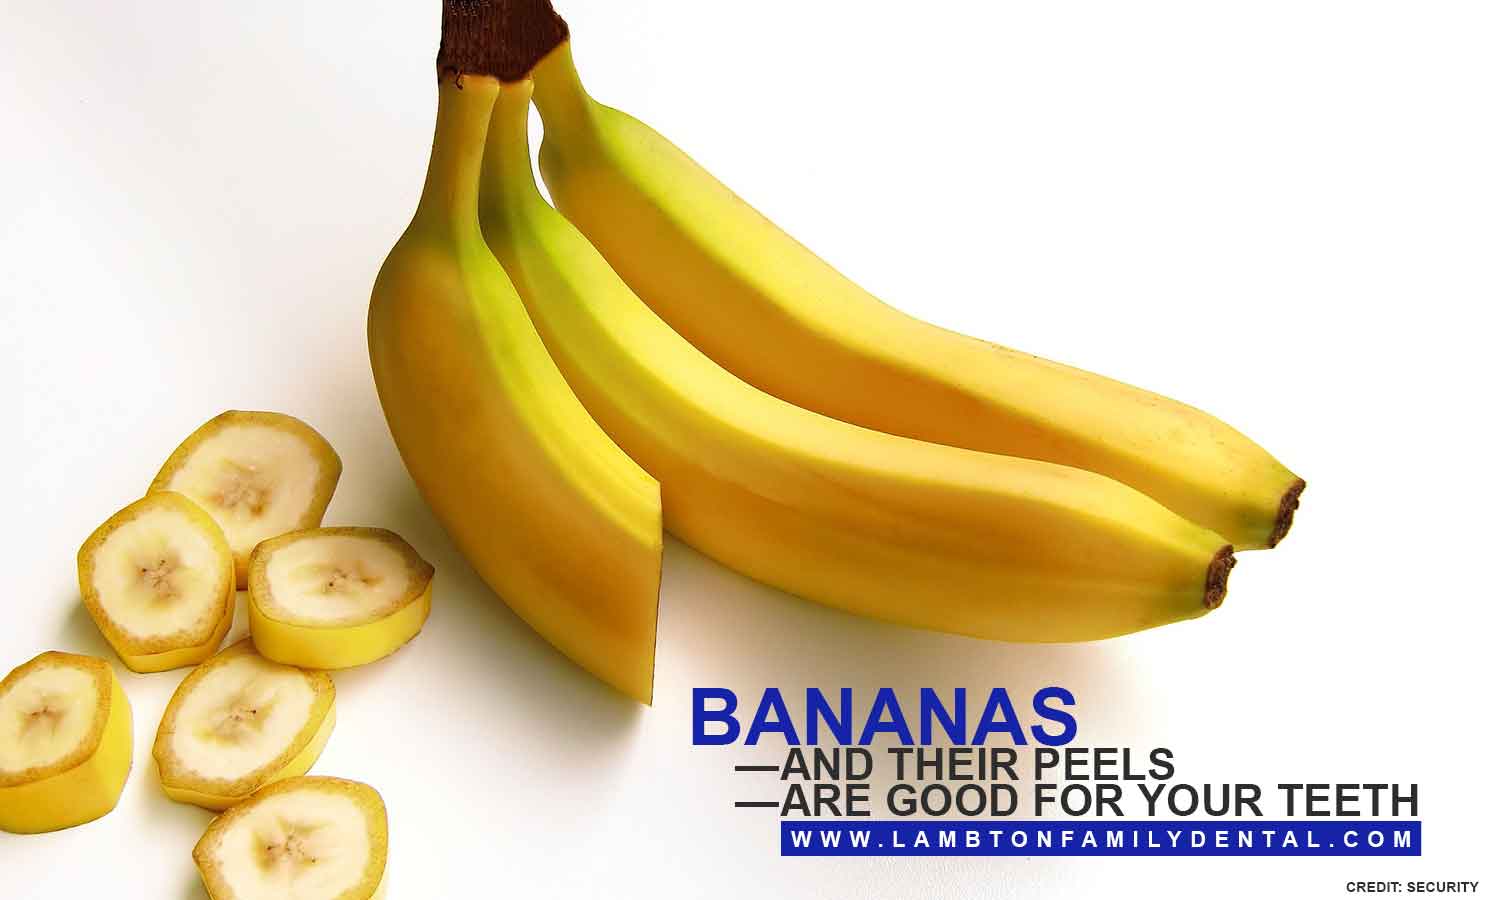 Bananas—and their peels—are good for your teeth